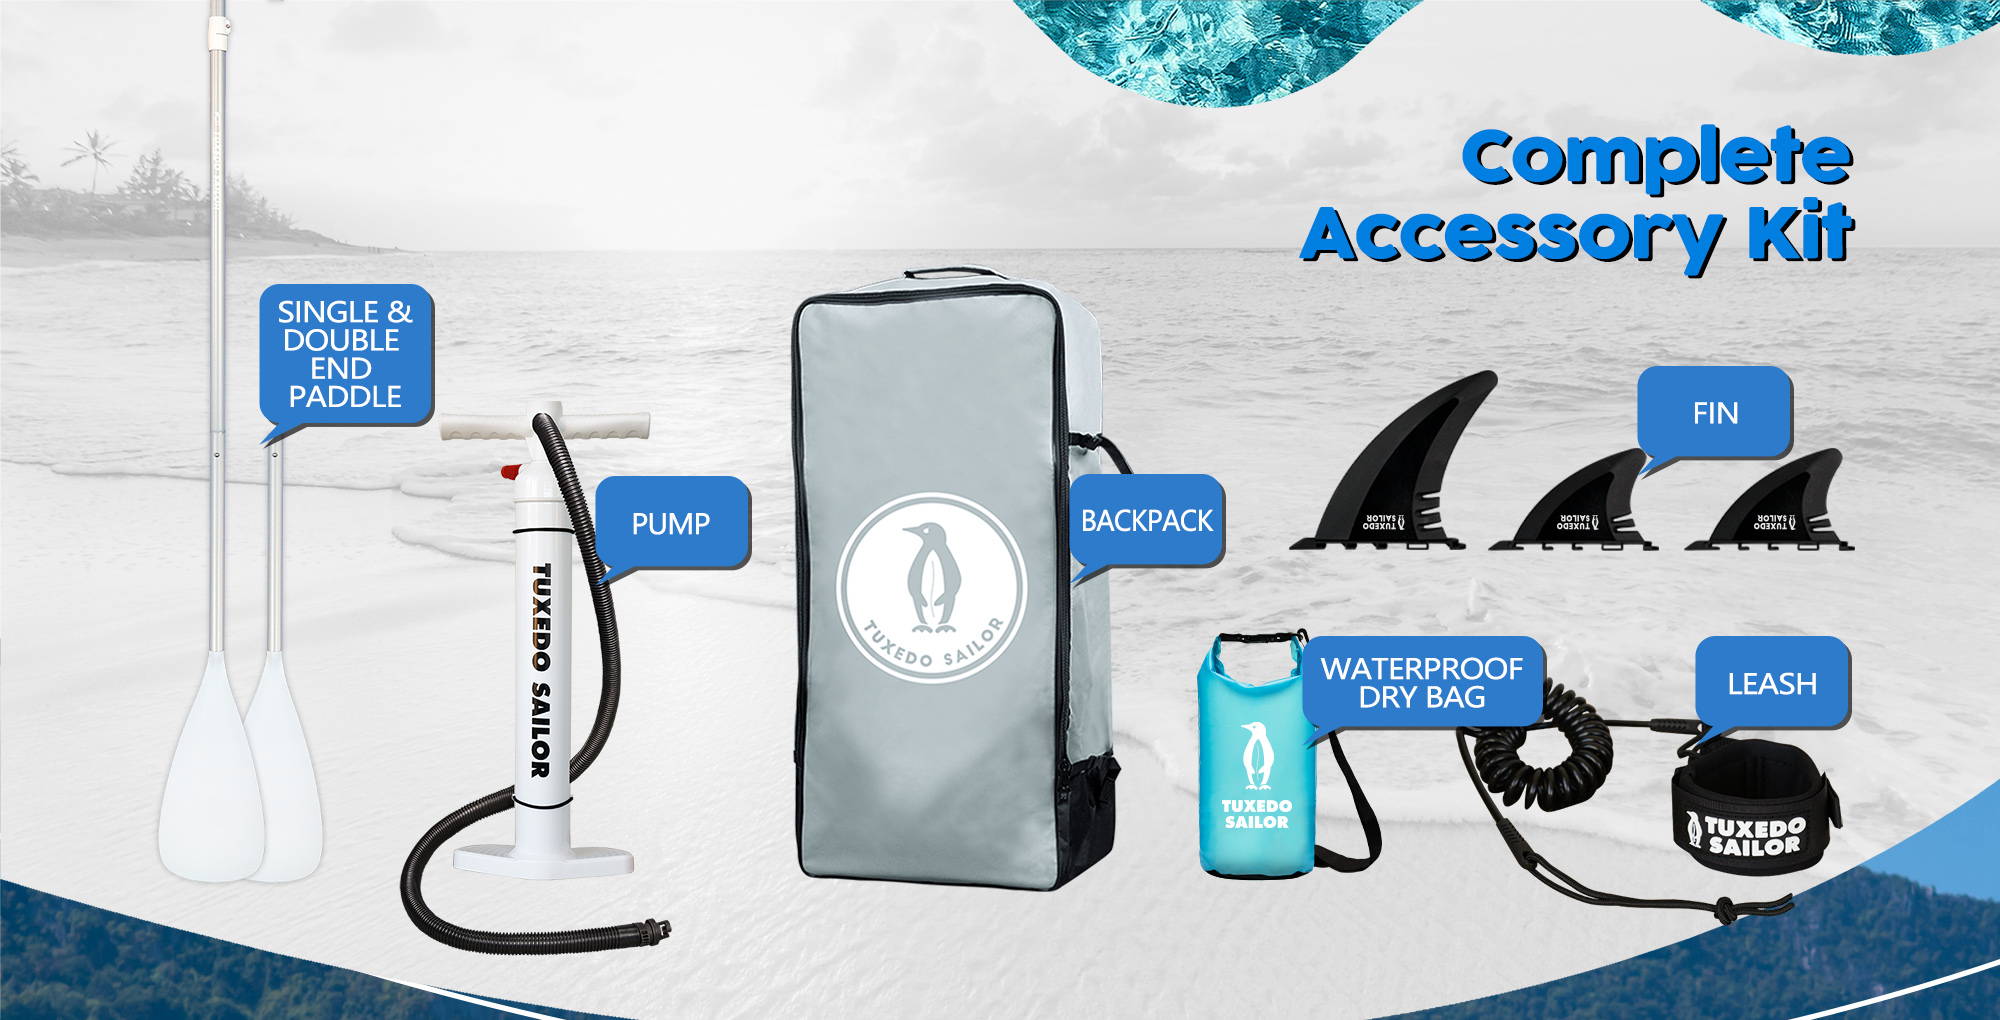 Accessories included with the rocket paddle board